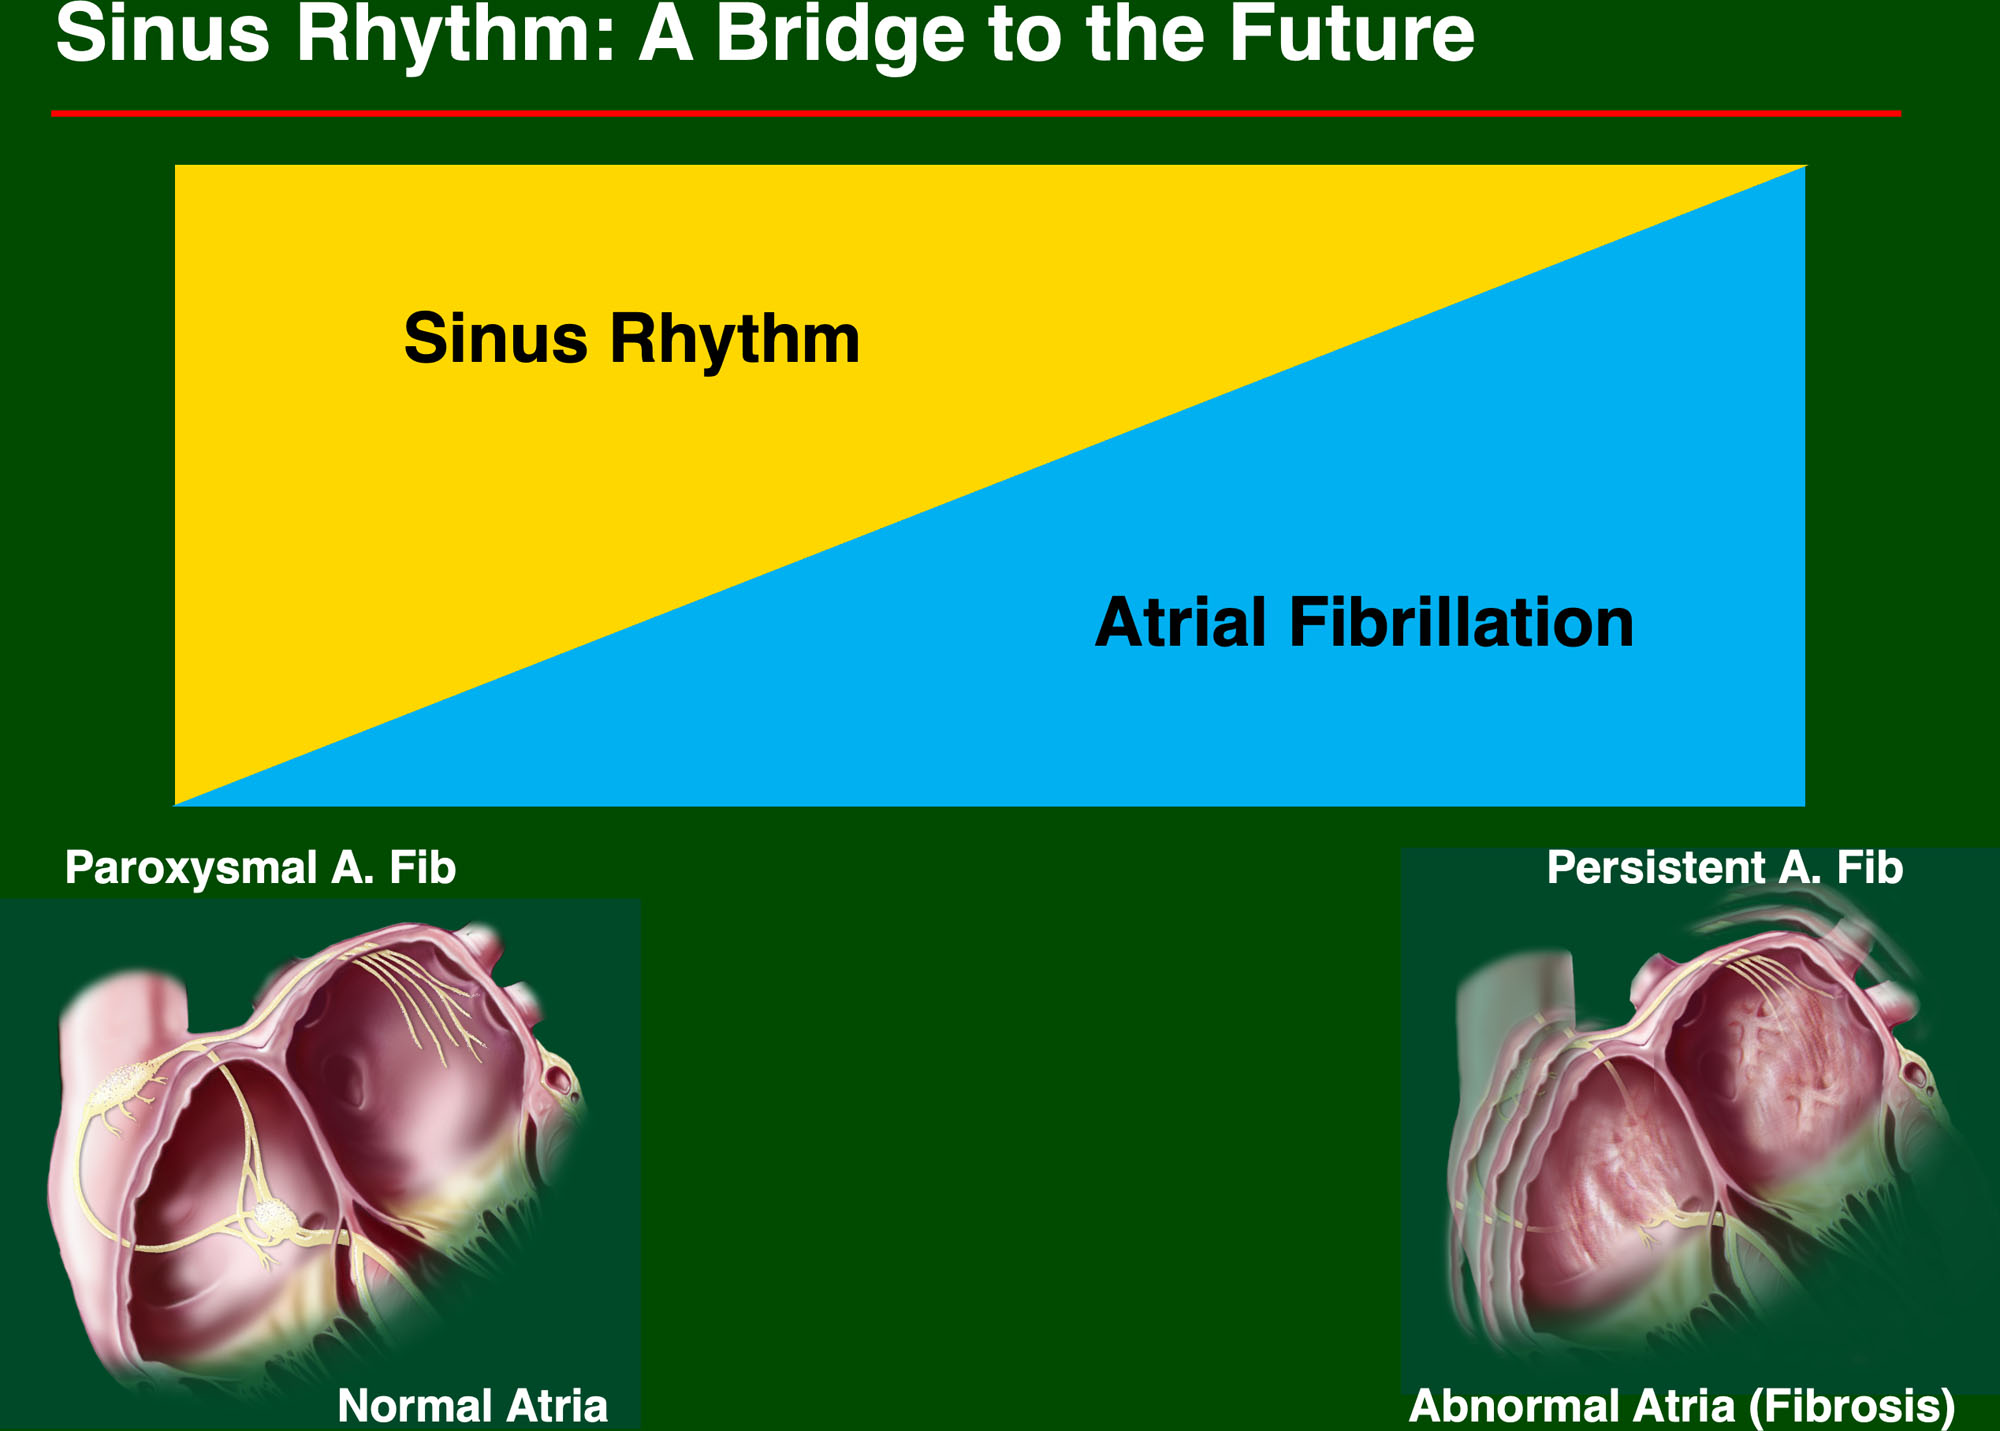 Rate Versus Rhythm Control for Atrial Fibrillation: Has the Debate Been Settled?